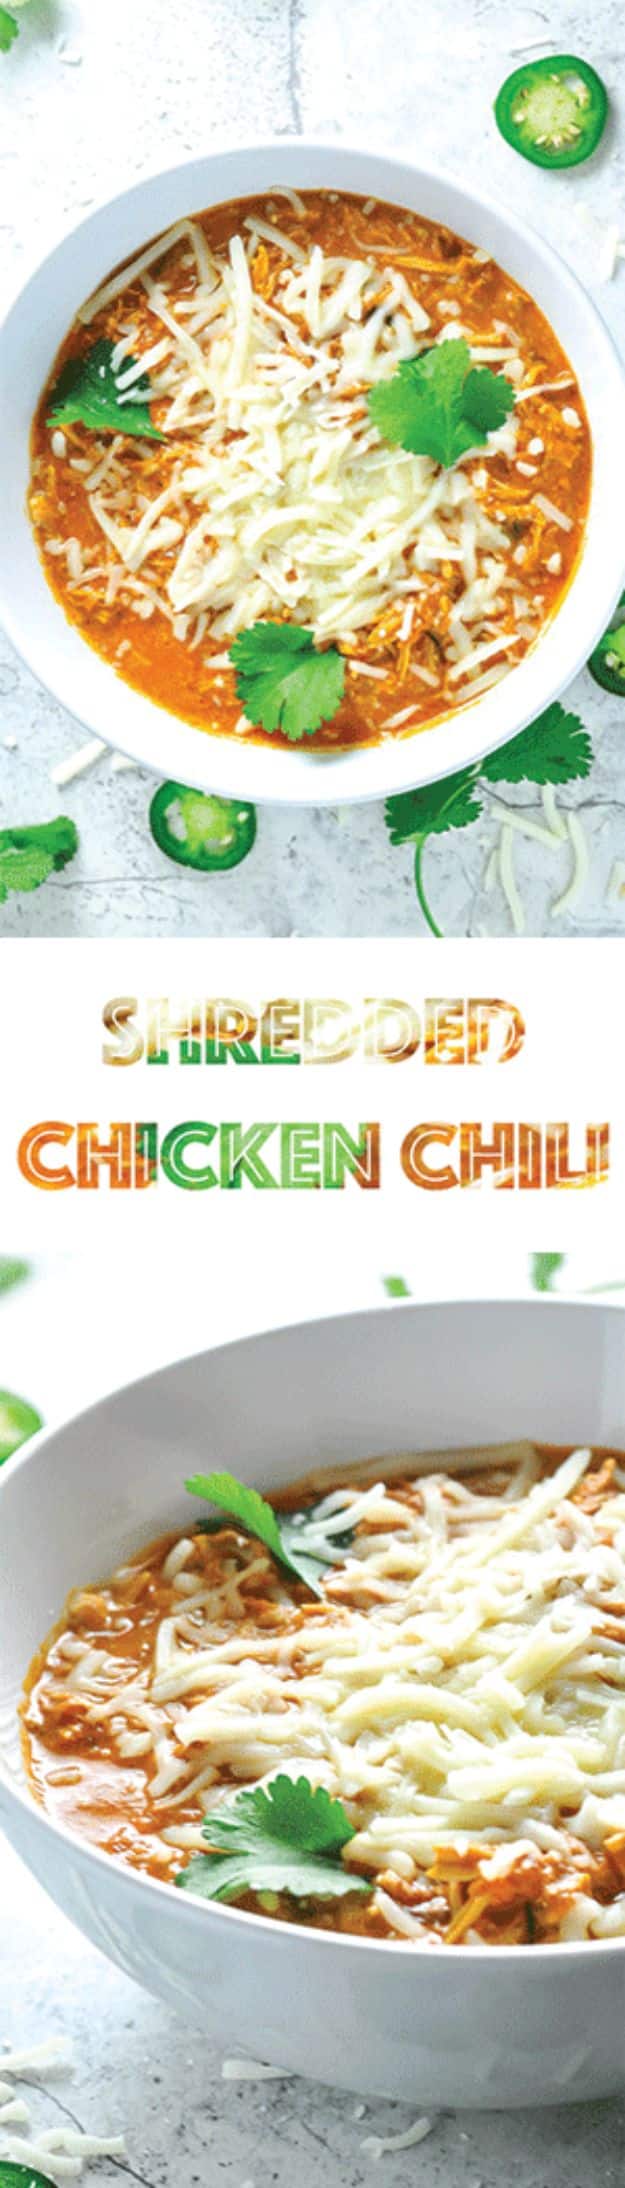 Easy Recipes For Rotisserie Chicken - Shredded Chicken Chili - Healthy Recipe Ideas for Leftovers - Comfort Foods With Chicken - Low Carb and Gluten Free, Crock Pot Meals,#easyrecipes #dinnerideas #recipes